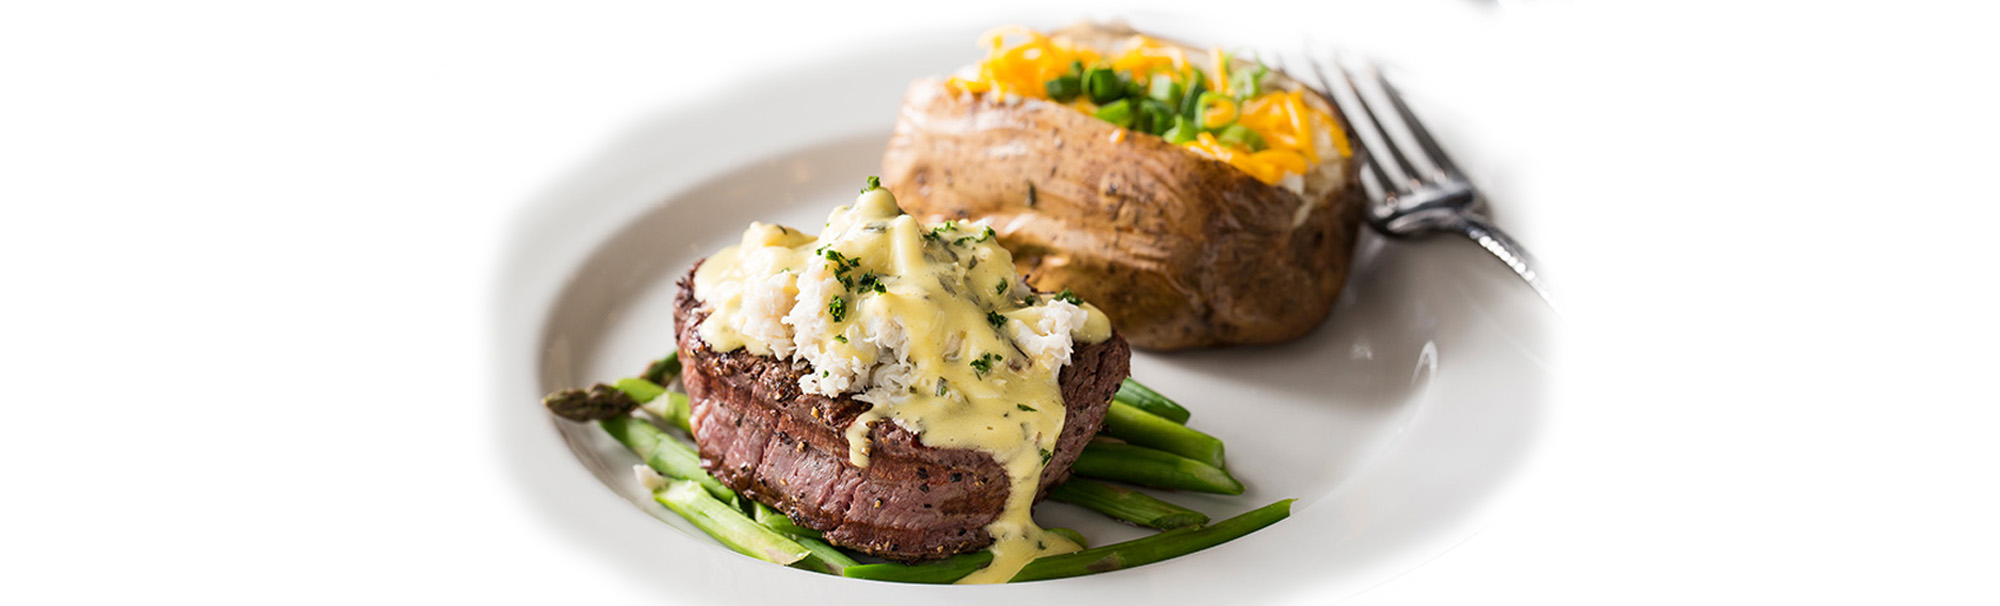 Steak with Crab and Baked Potato